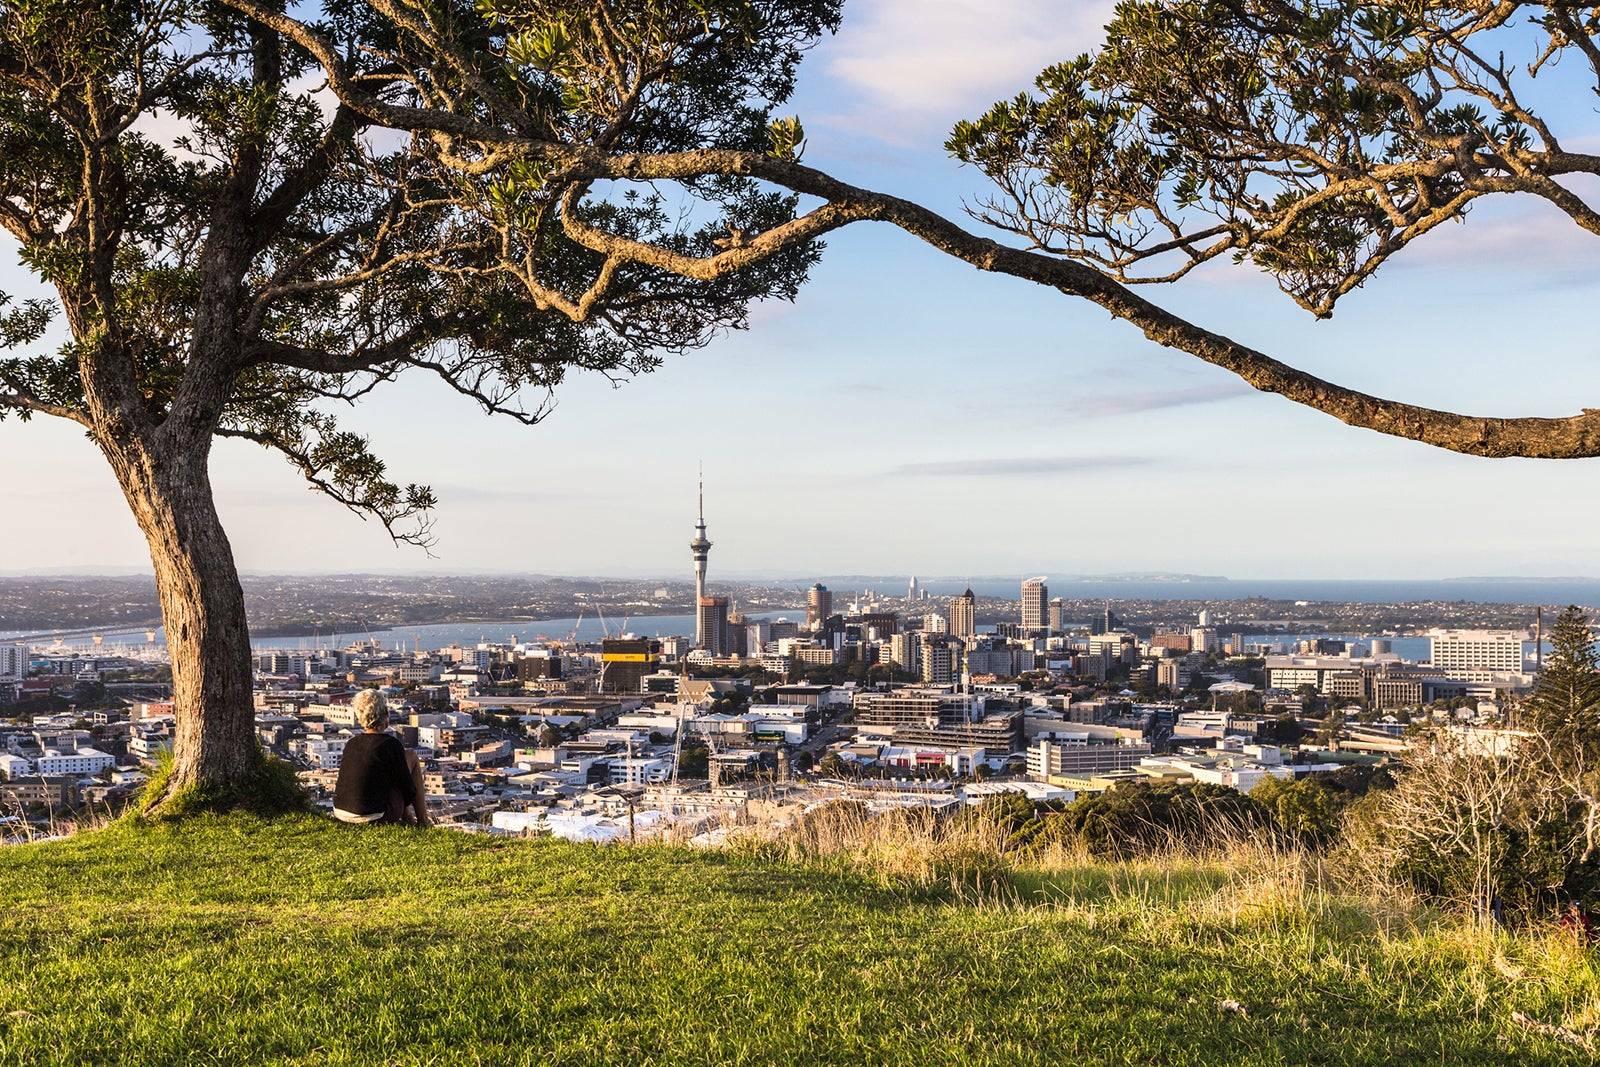 Book now: Open business-class award availability to New Zealand this spring